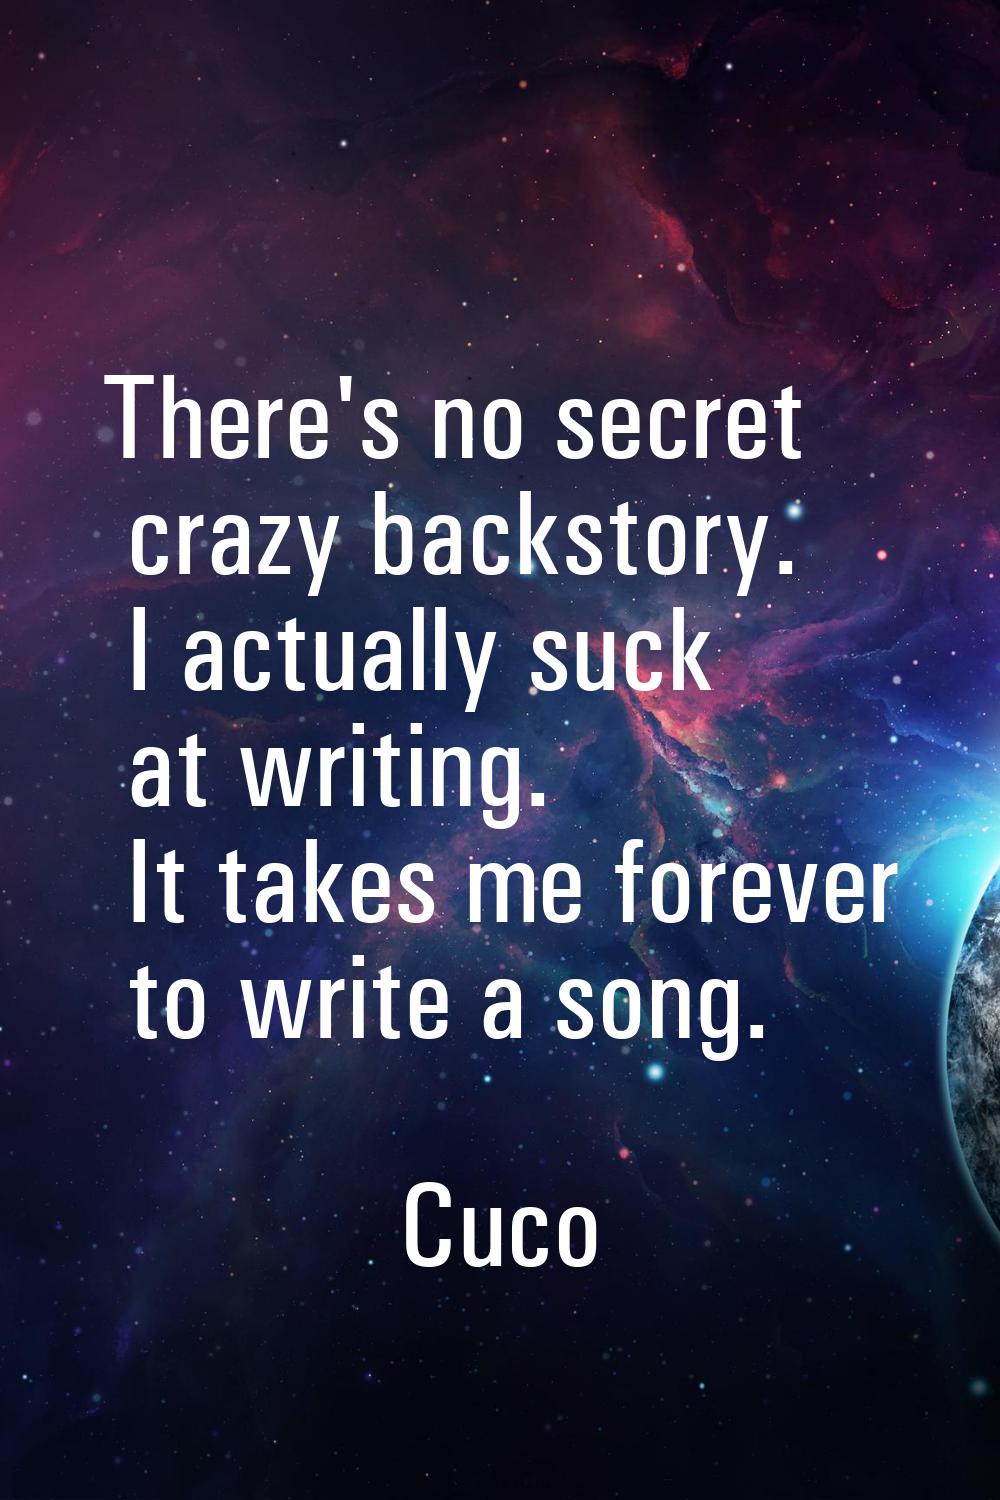 There's no secret crazy backstory. I actually suck at writing. It takes me forever to write a song.